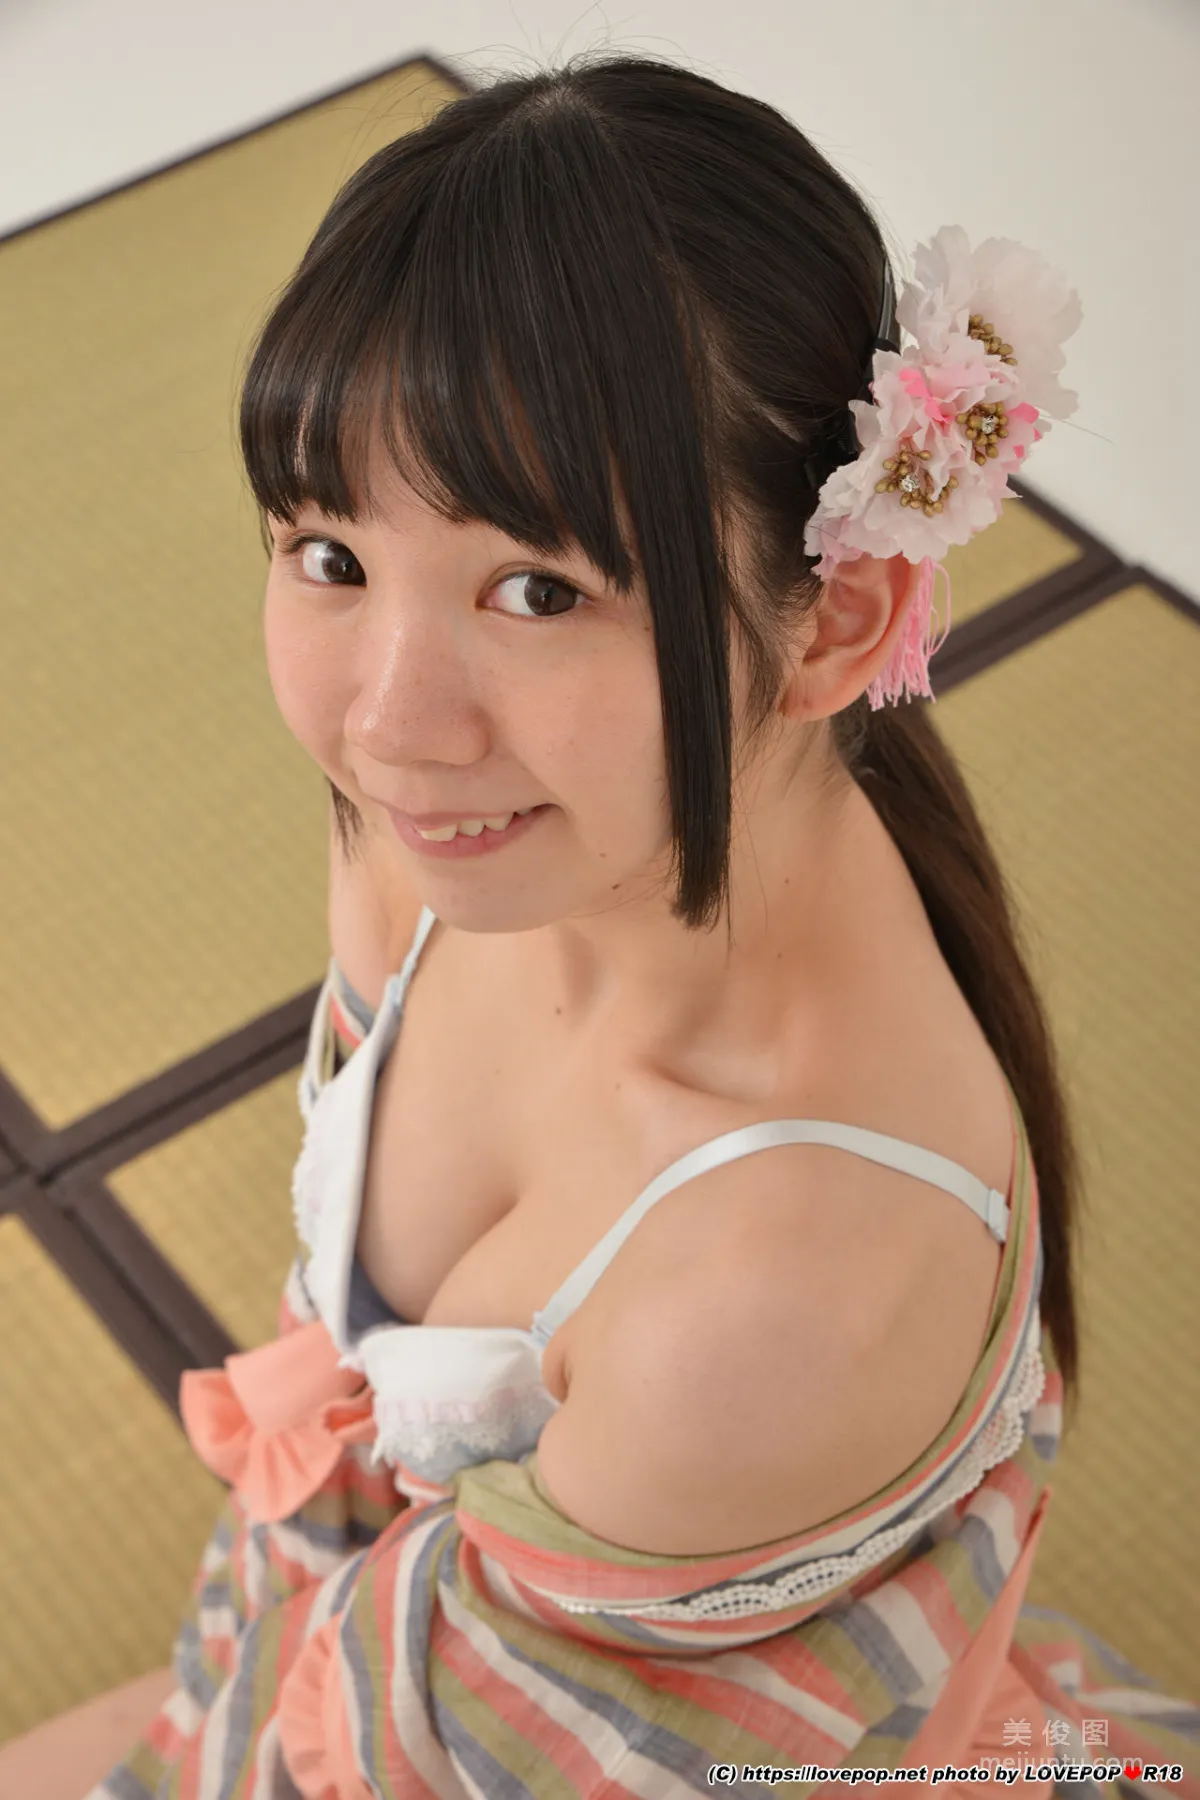 [LOVEPOP] Special Maid Collection - 白井ゆずか Photoset 0348